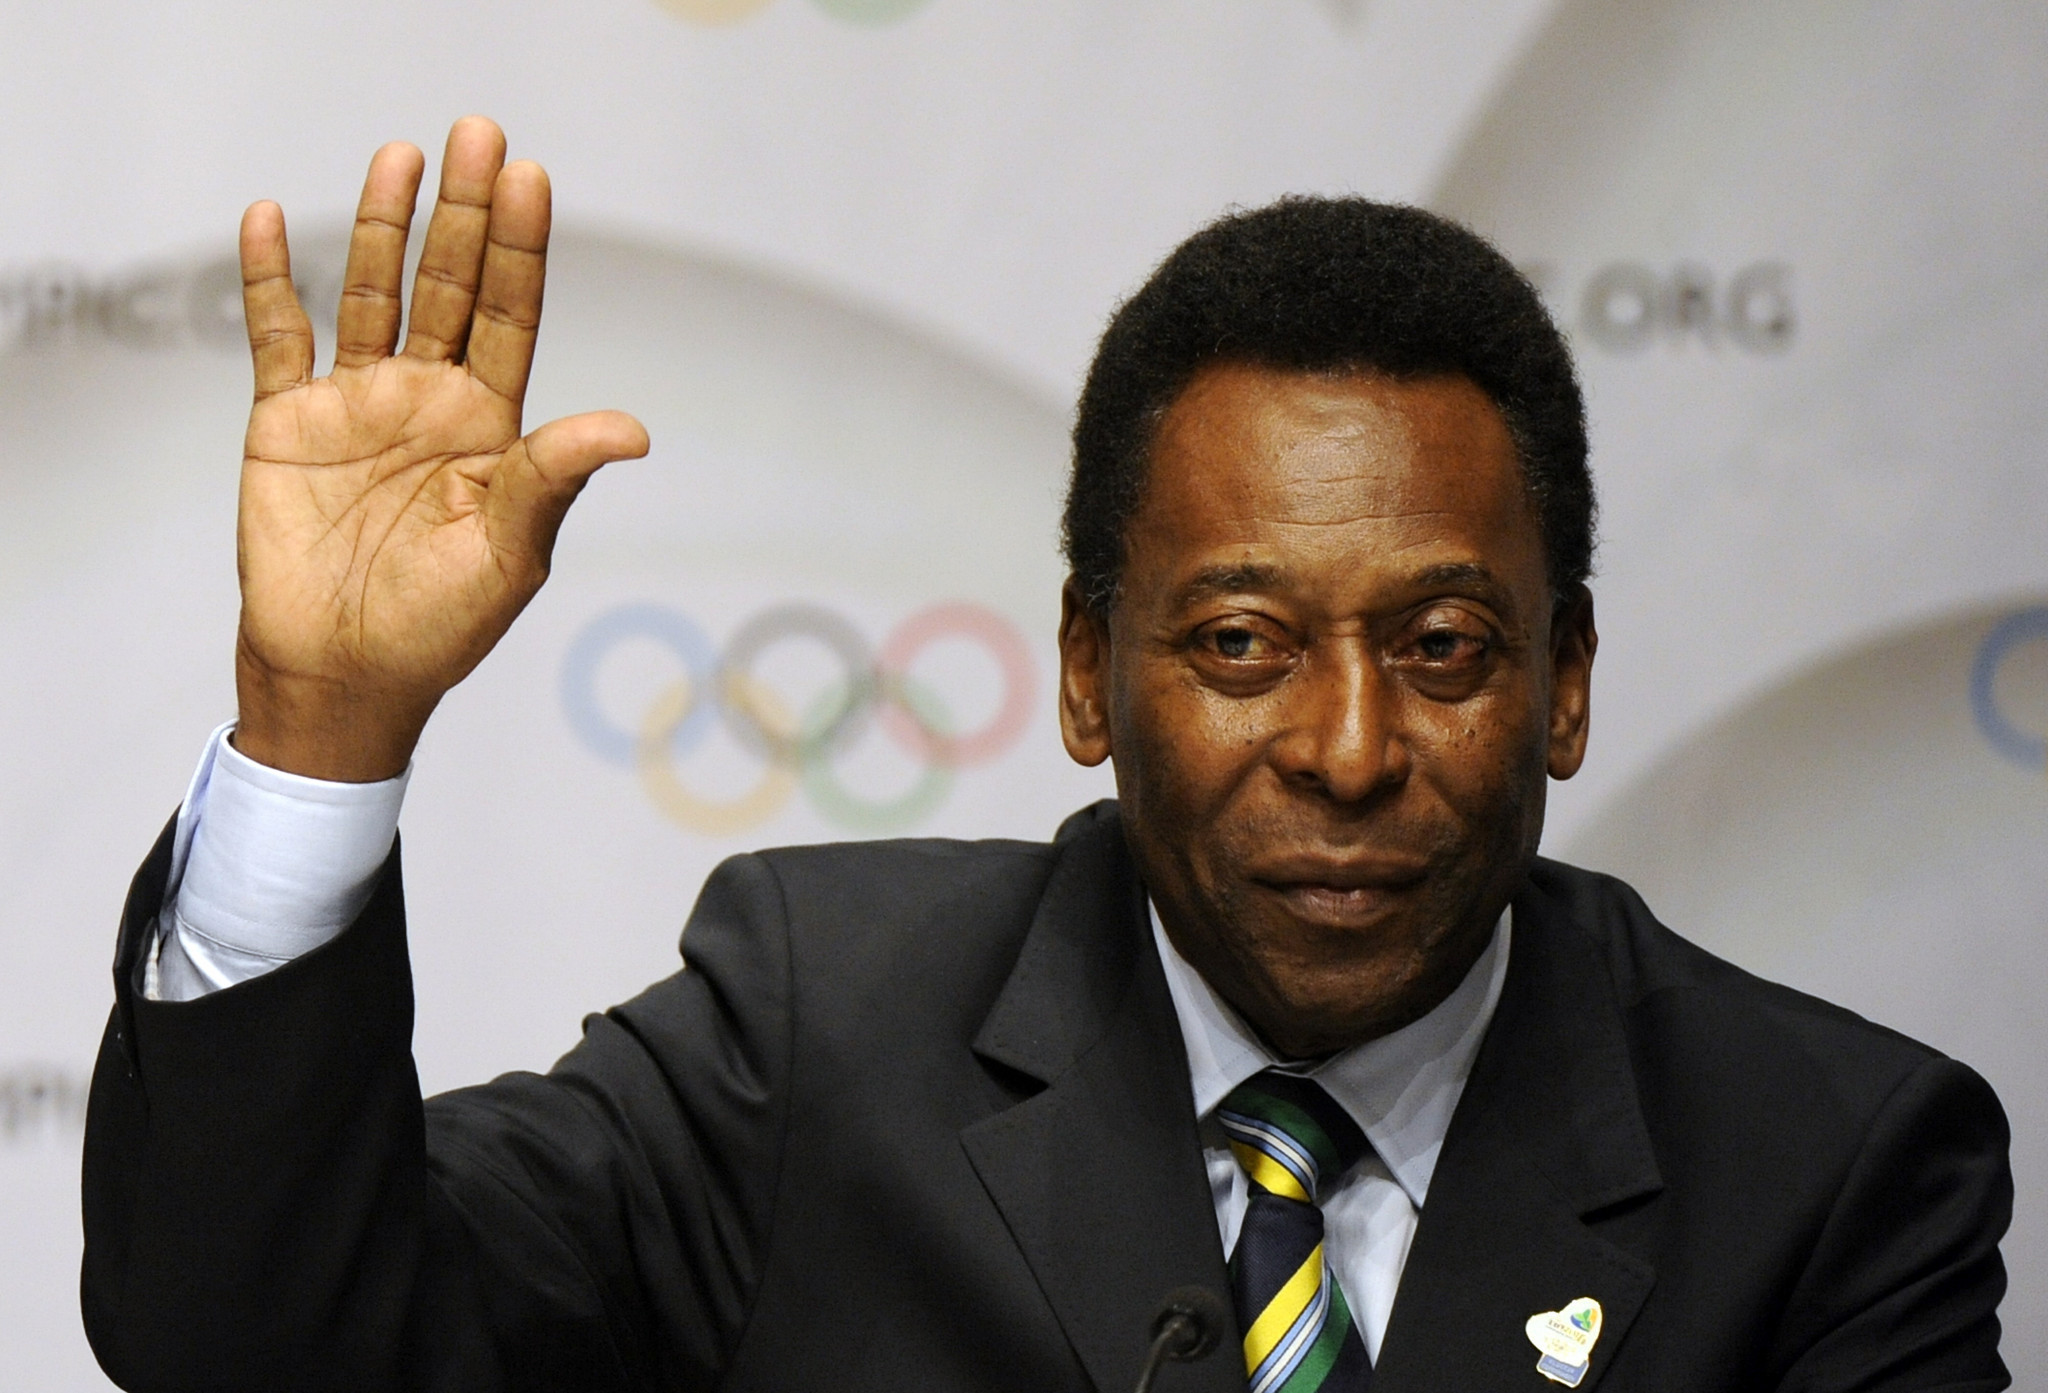 Pelé, pictured speaking at the 2009 IOC Session in Copenhagen, is due to be called to give evidence by Carlos Nuzman's defence team ©Getty Images